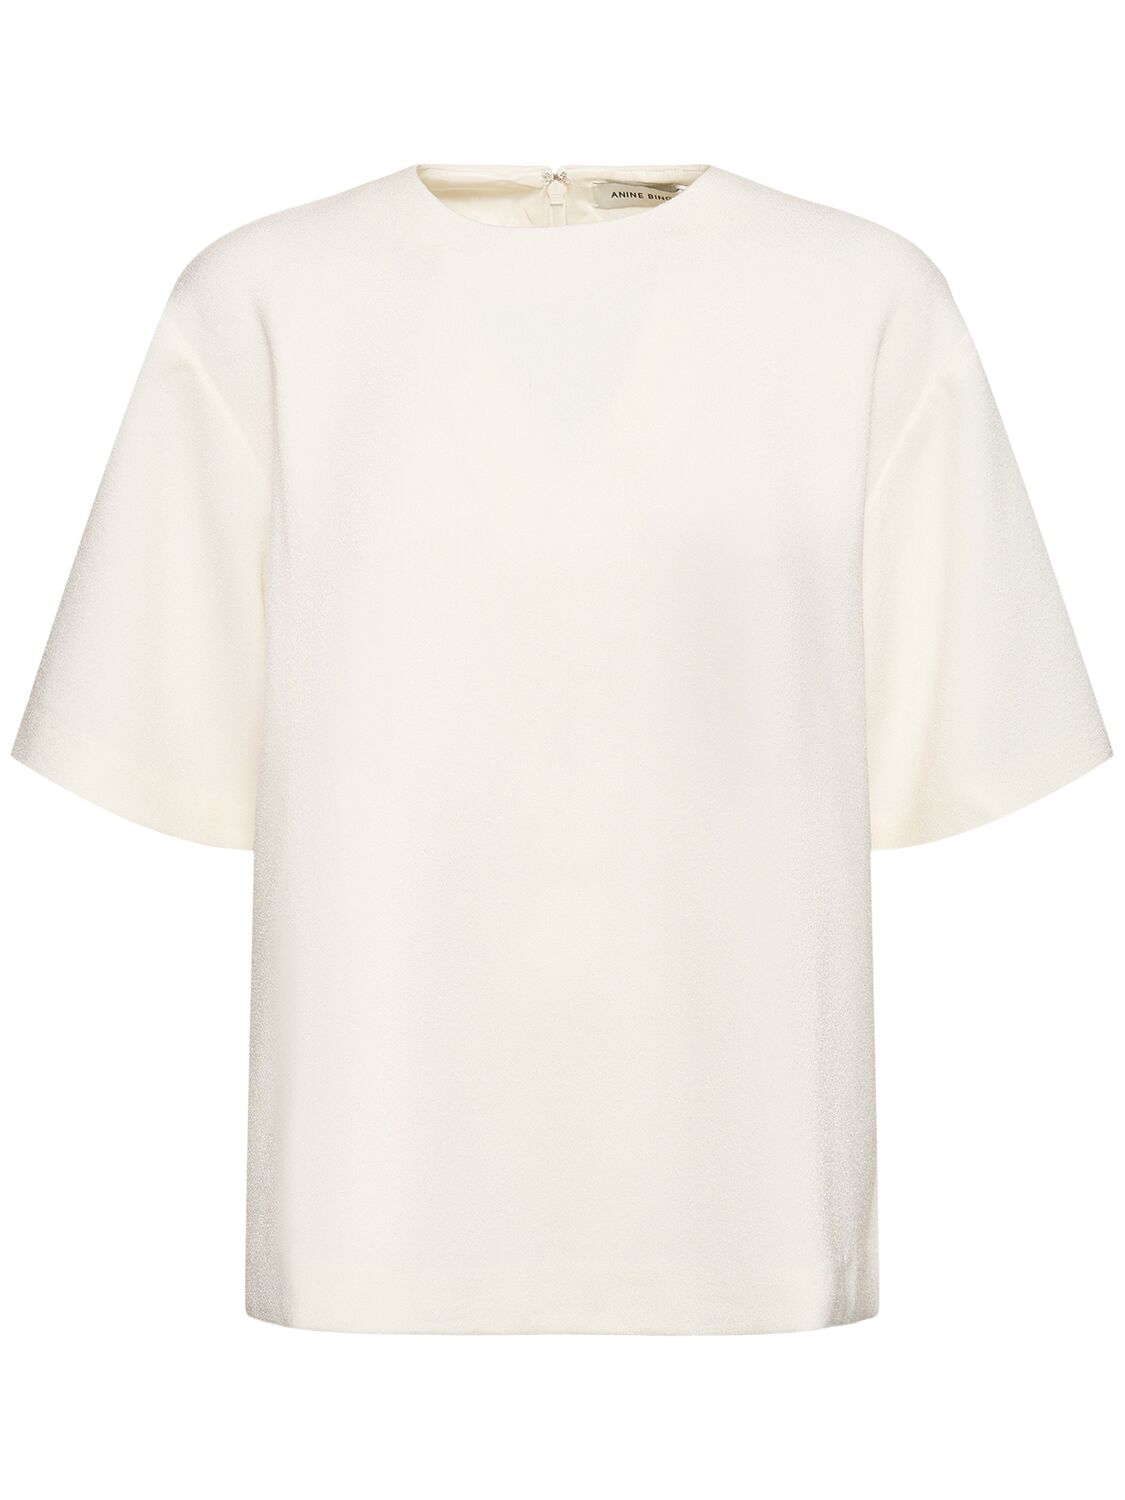 Anine Bing Maddie Tech Crepe Top In White